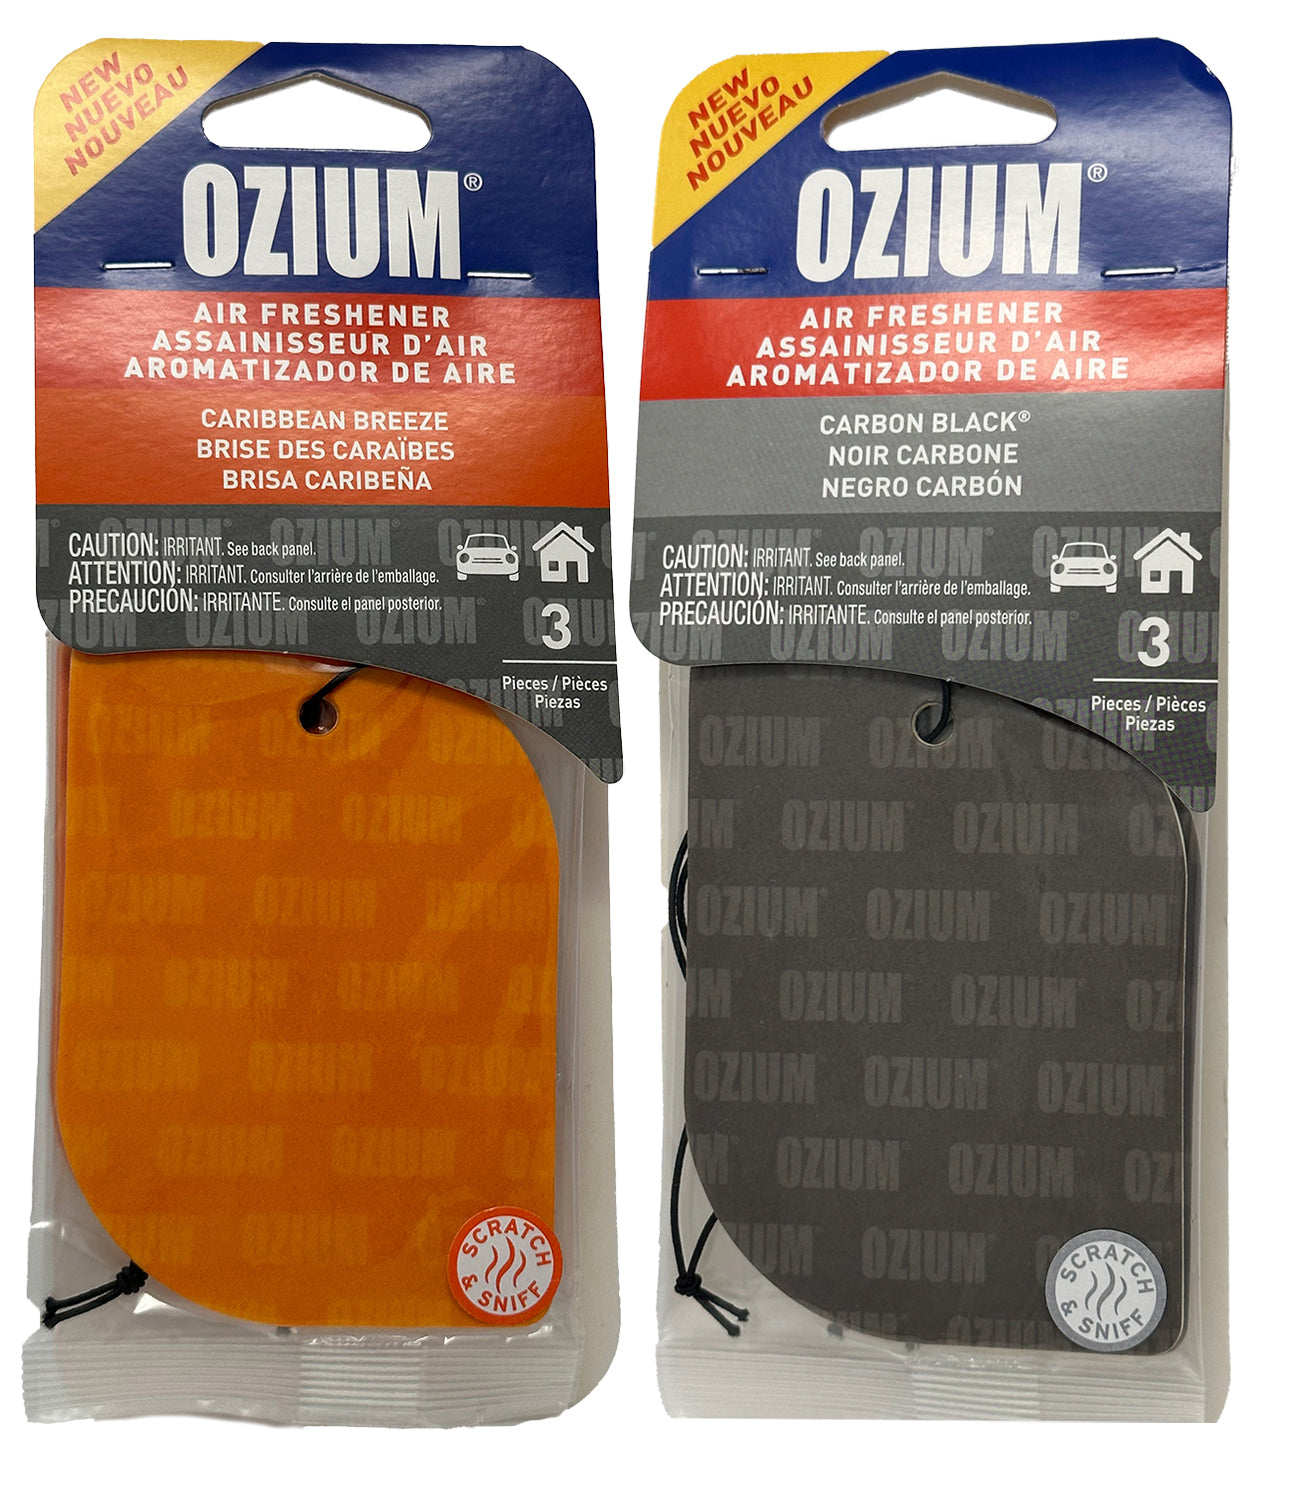 Ozium Paper Hanging Car Air Freshener with Odor Eliminator for Car -  Refresh Your Ride with Automotive Air Fresheners, 3 Pack. Caribbean Breeze  + Carbon Black, Combo Kit by GOSO Direct